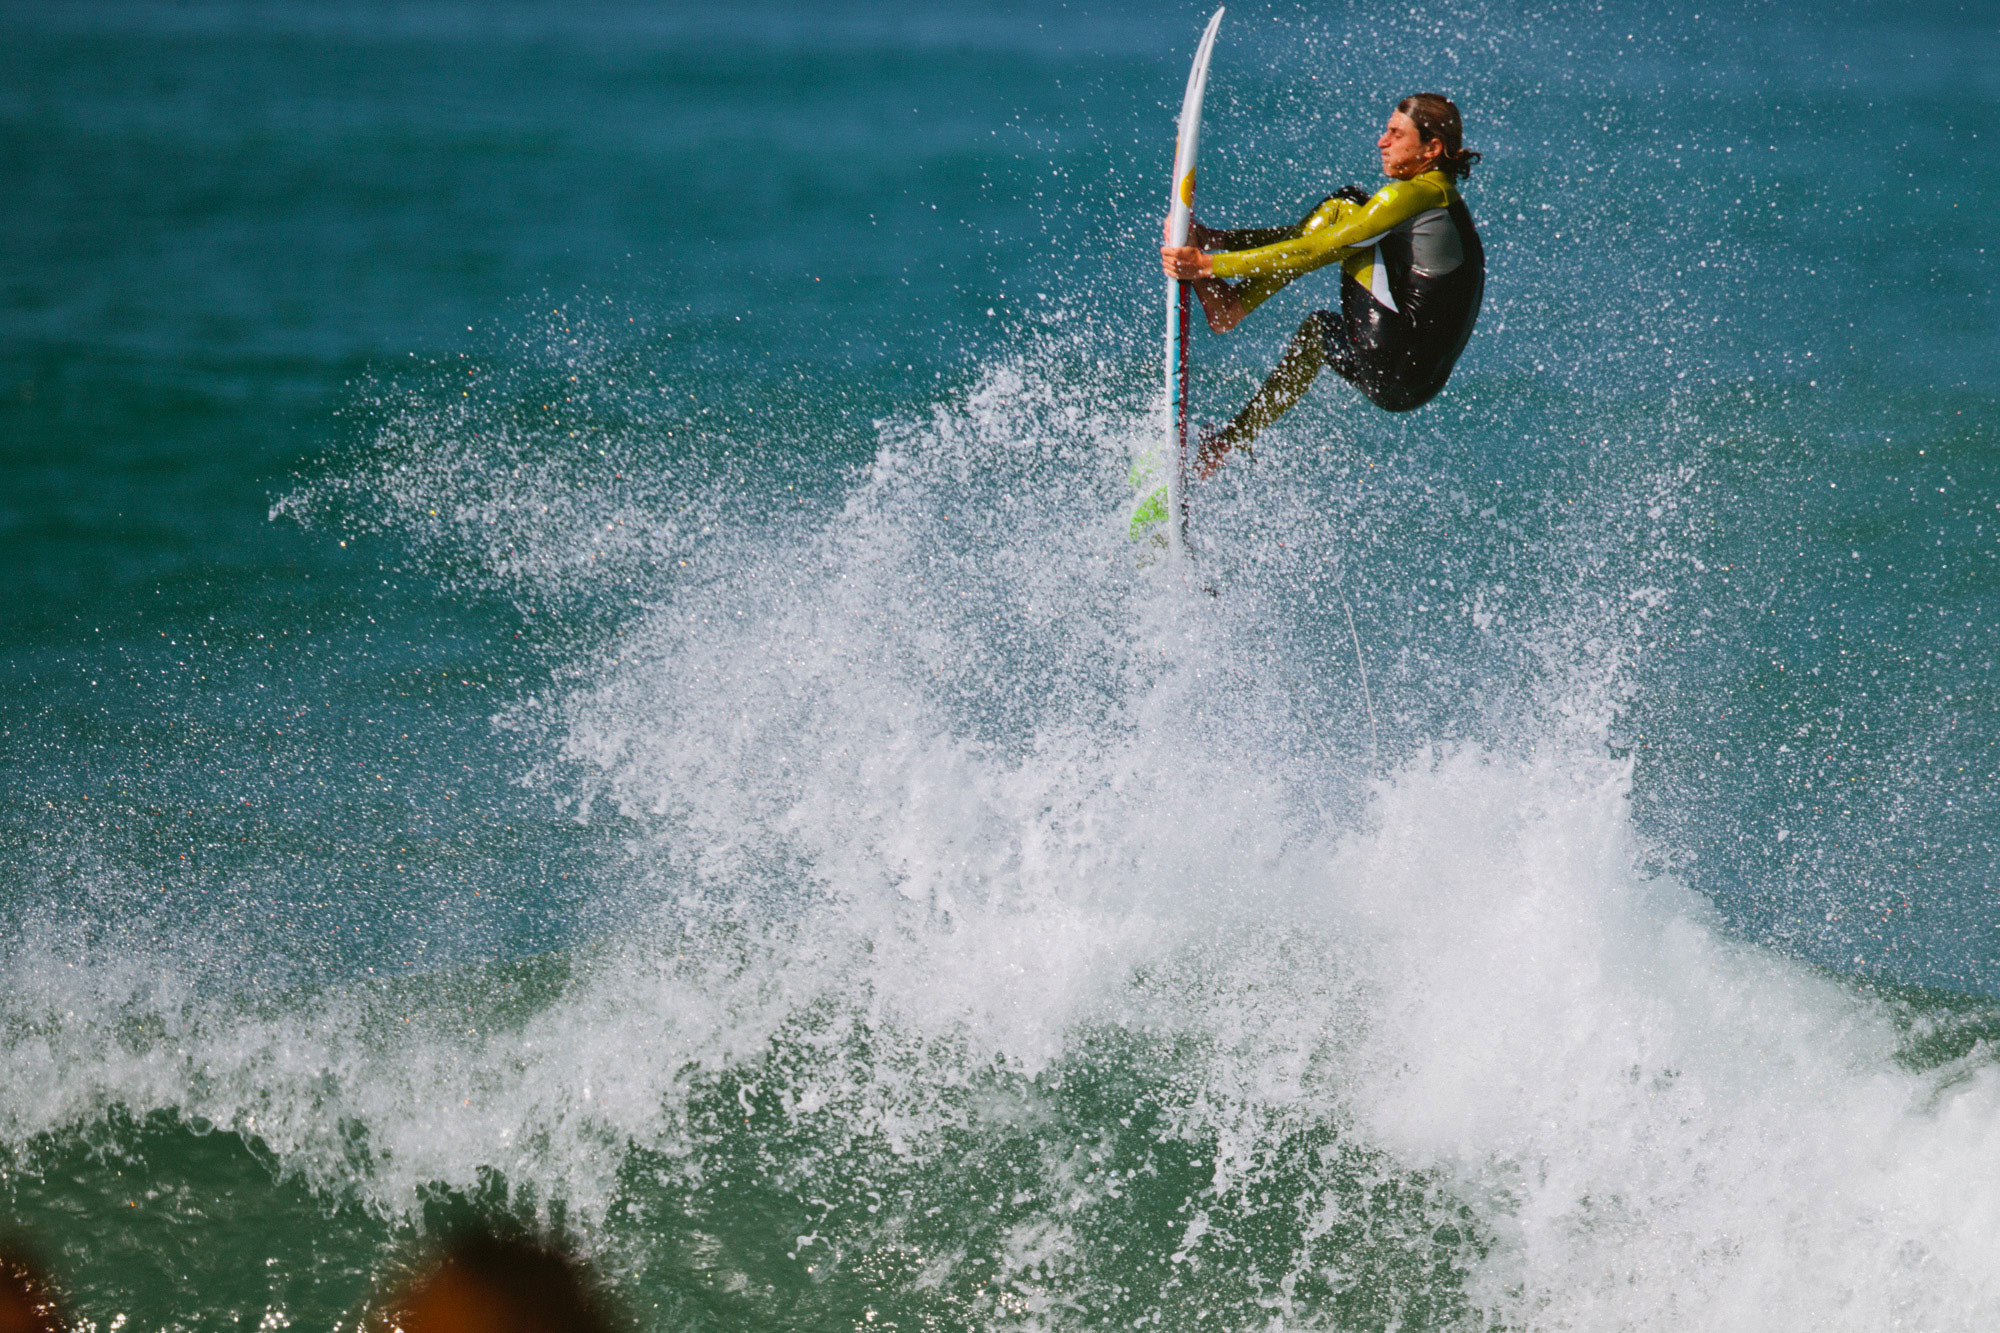 #2inamillion: Win a Trip for Two to the Quik Pro France